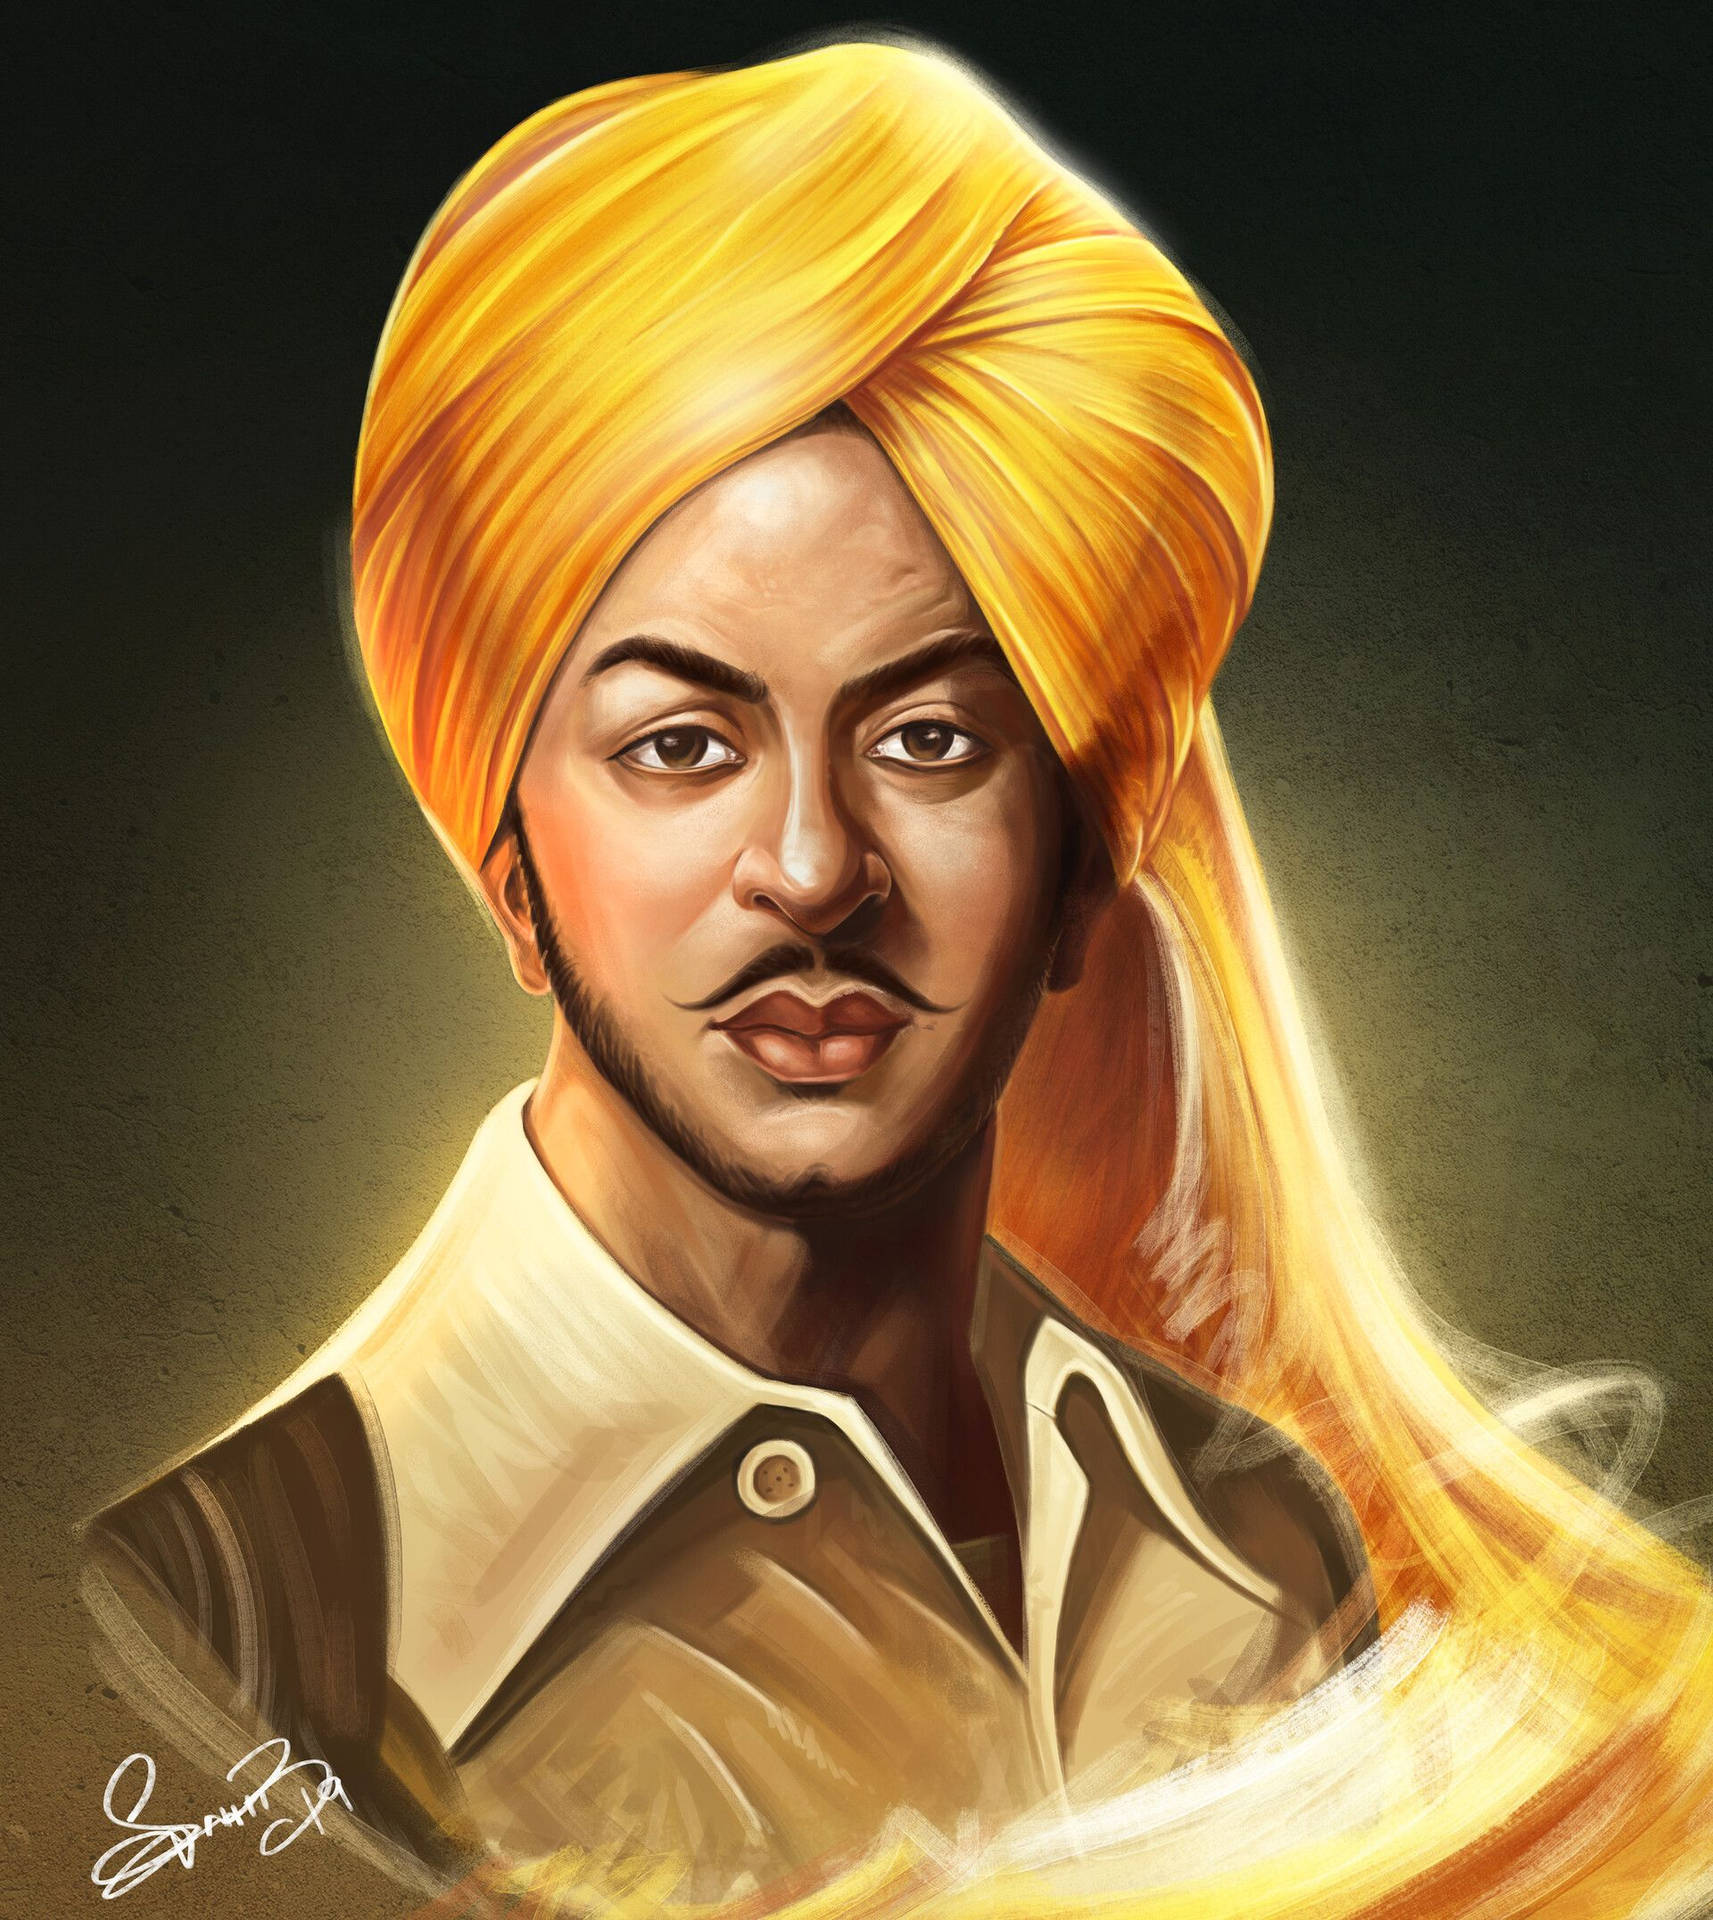 Shaheed Bhagat Singh Oil Painting Background